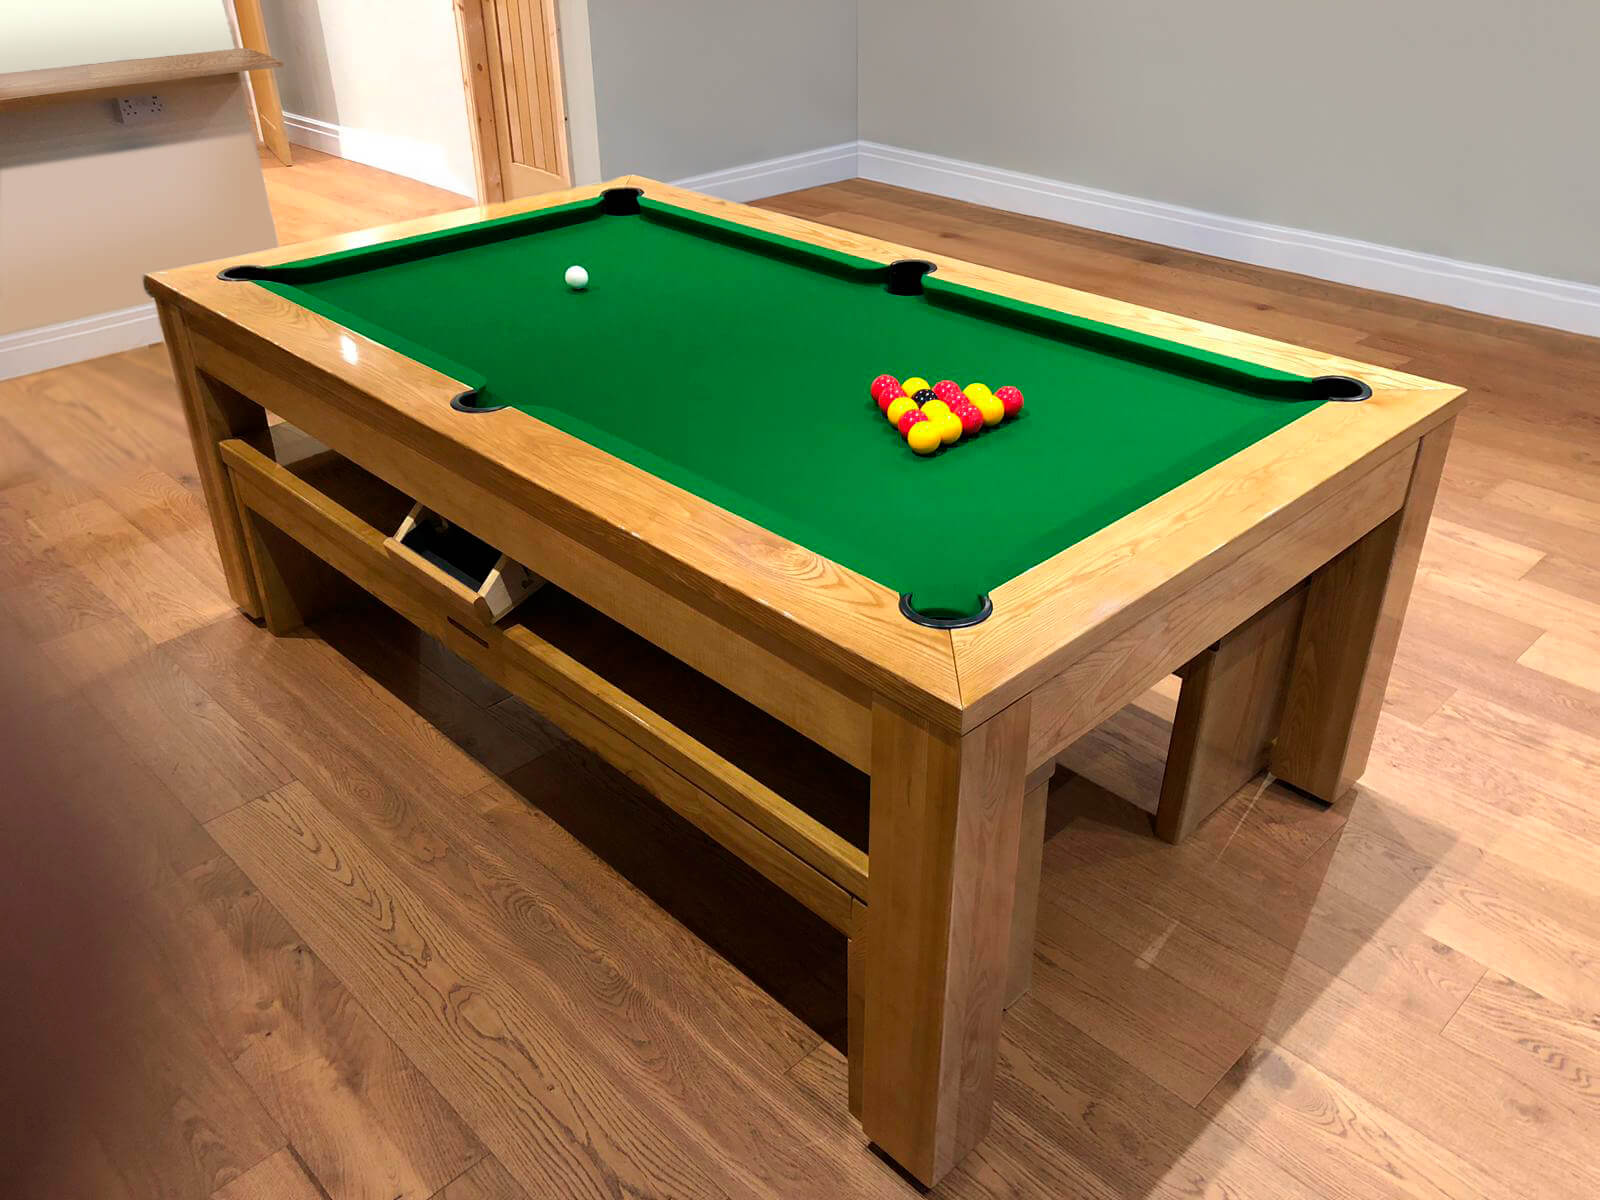 The Precision 7ft Solid Oak Slate Bed Pool Dining Table